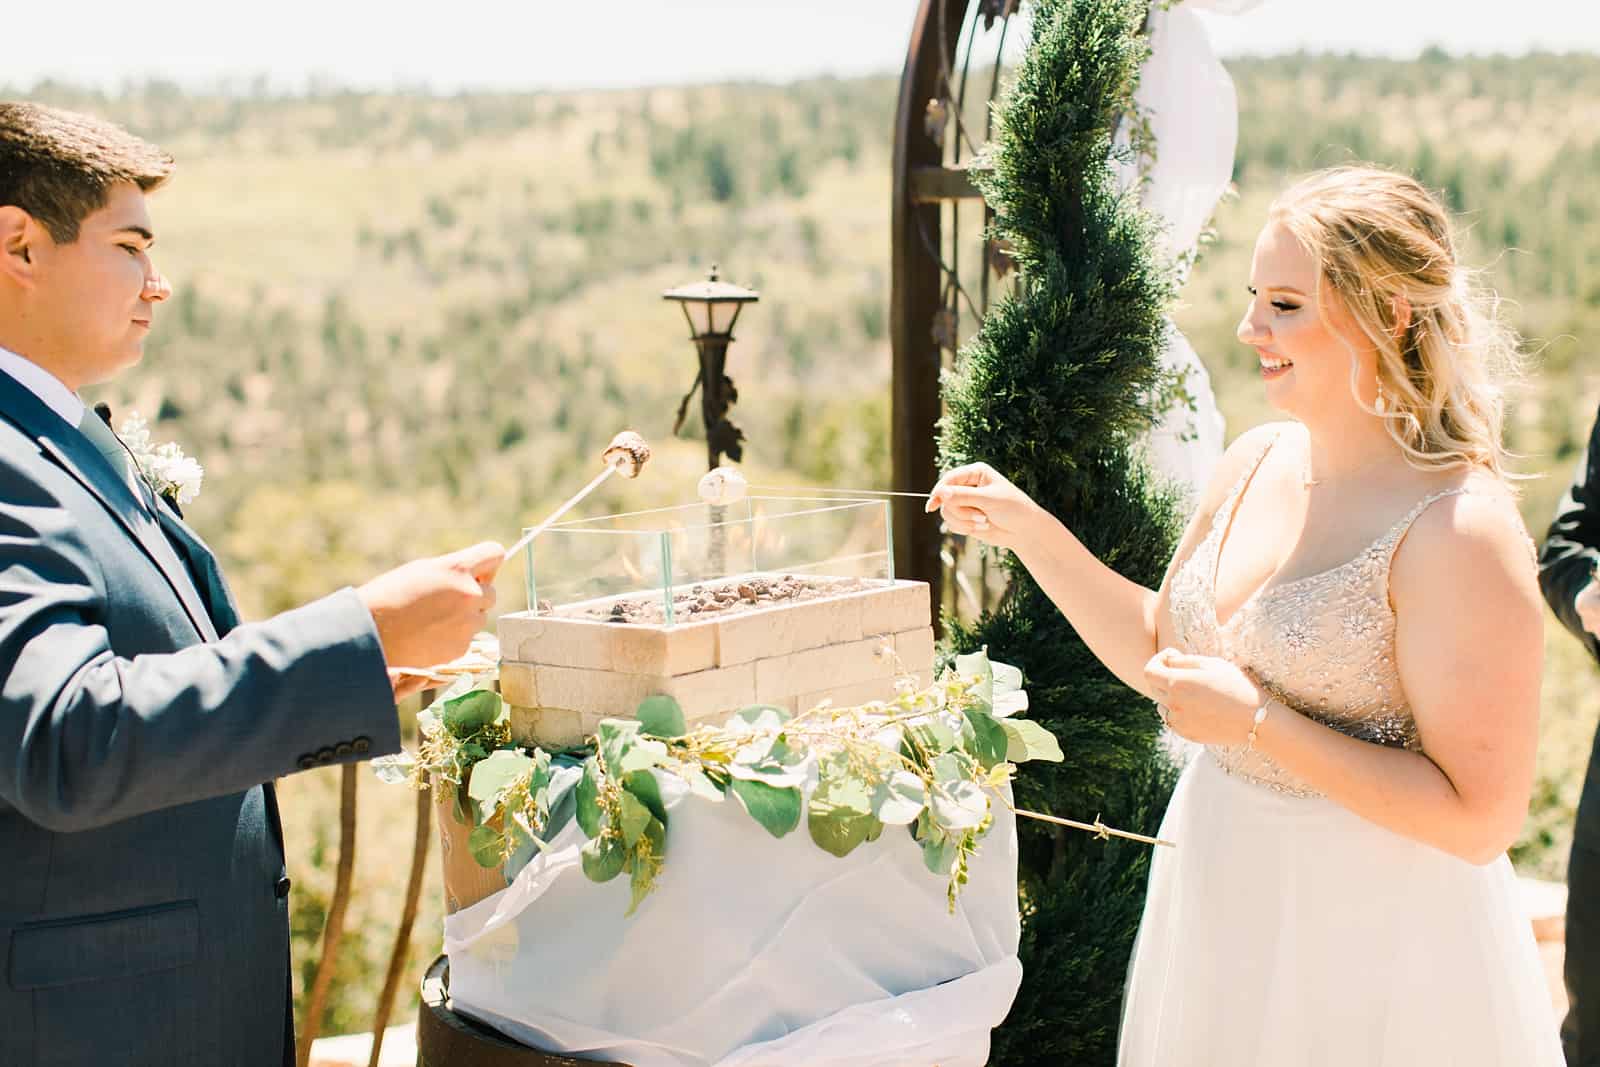 bride and groom roast s'mores during wedding ceremony